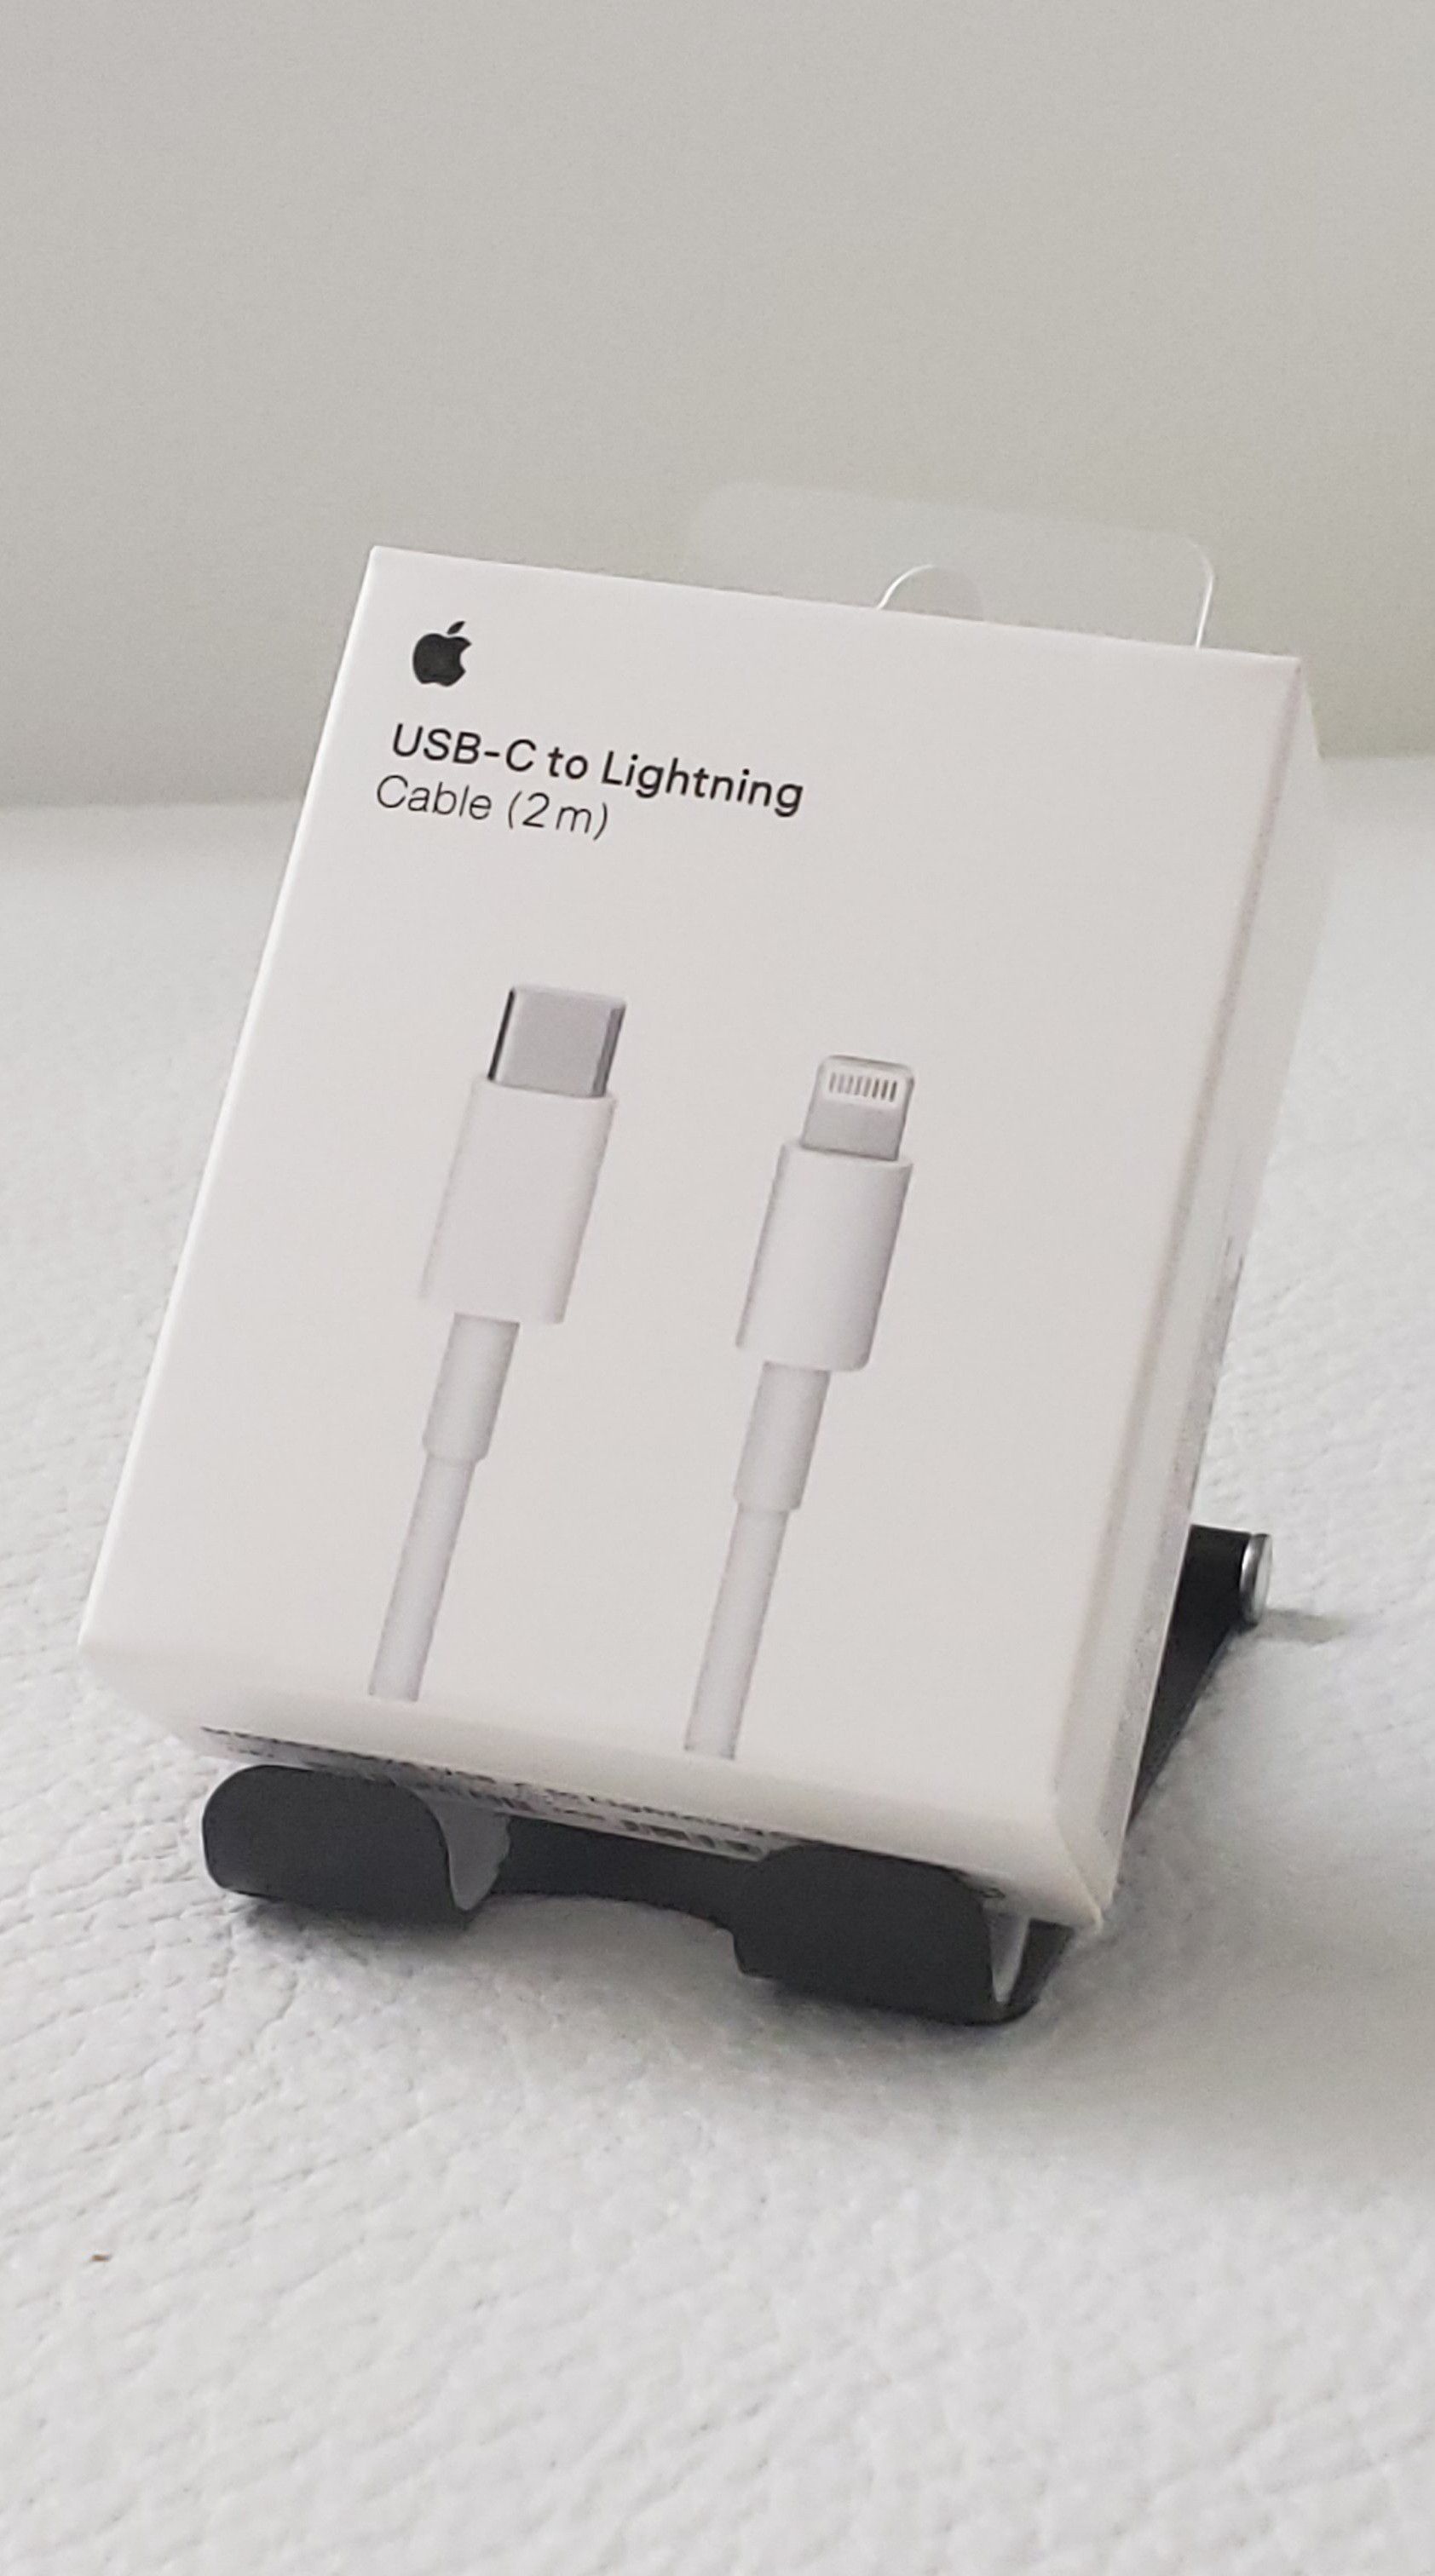 USB-C Lighting Cable (2m) RETAIL PACK